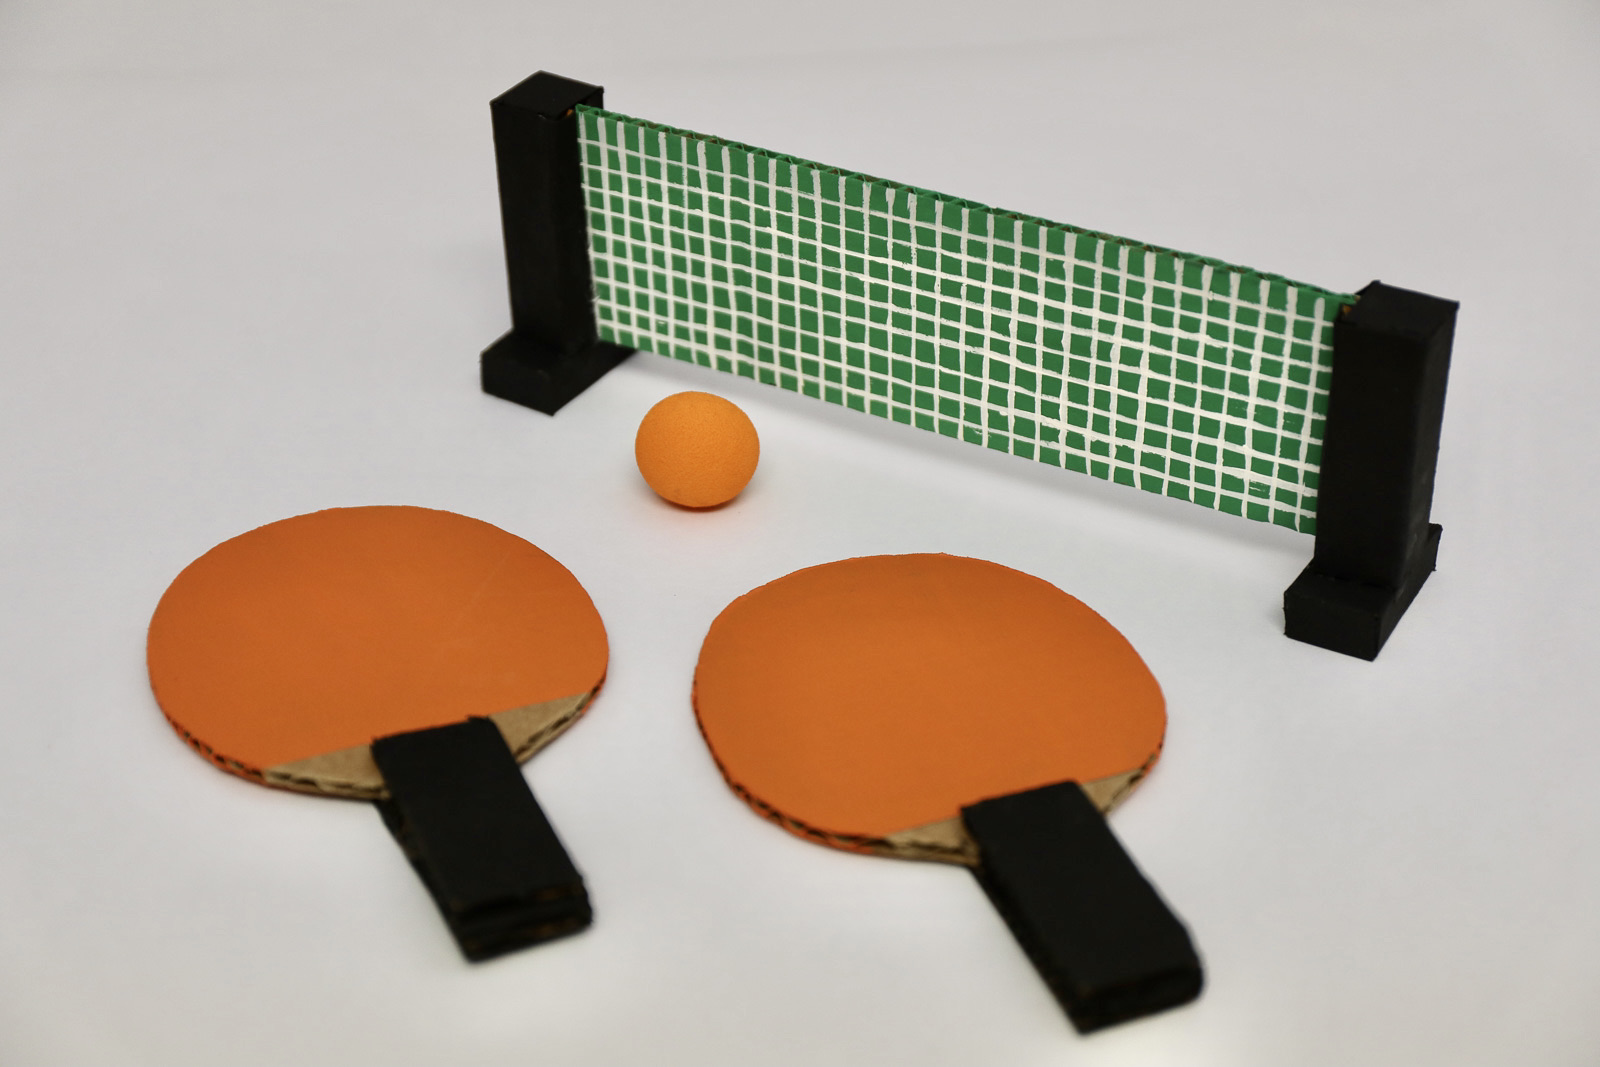 Two orange paddles, one small orange ball, and a green painted DIY tennis net